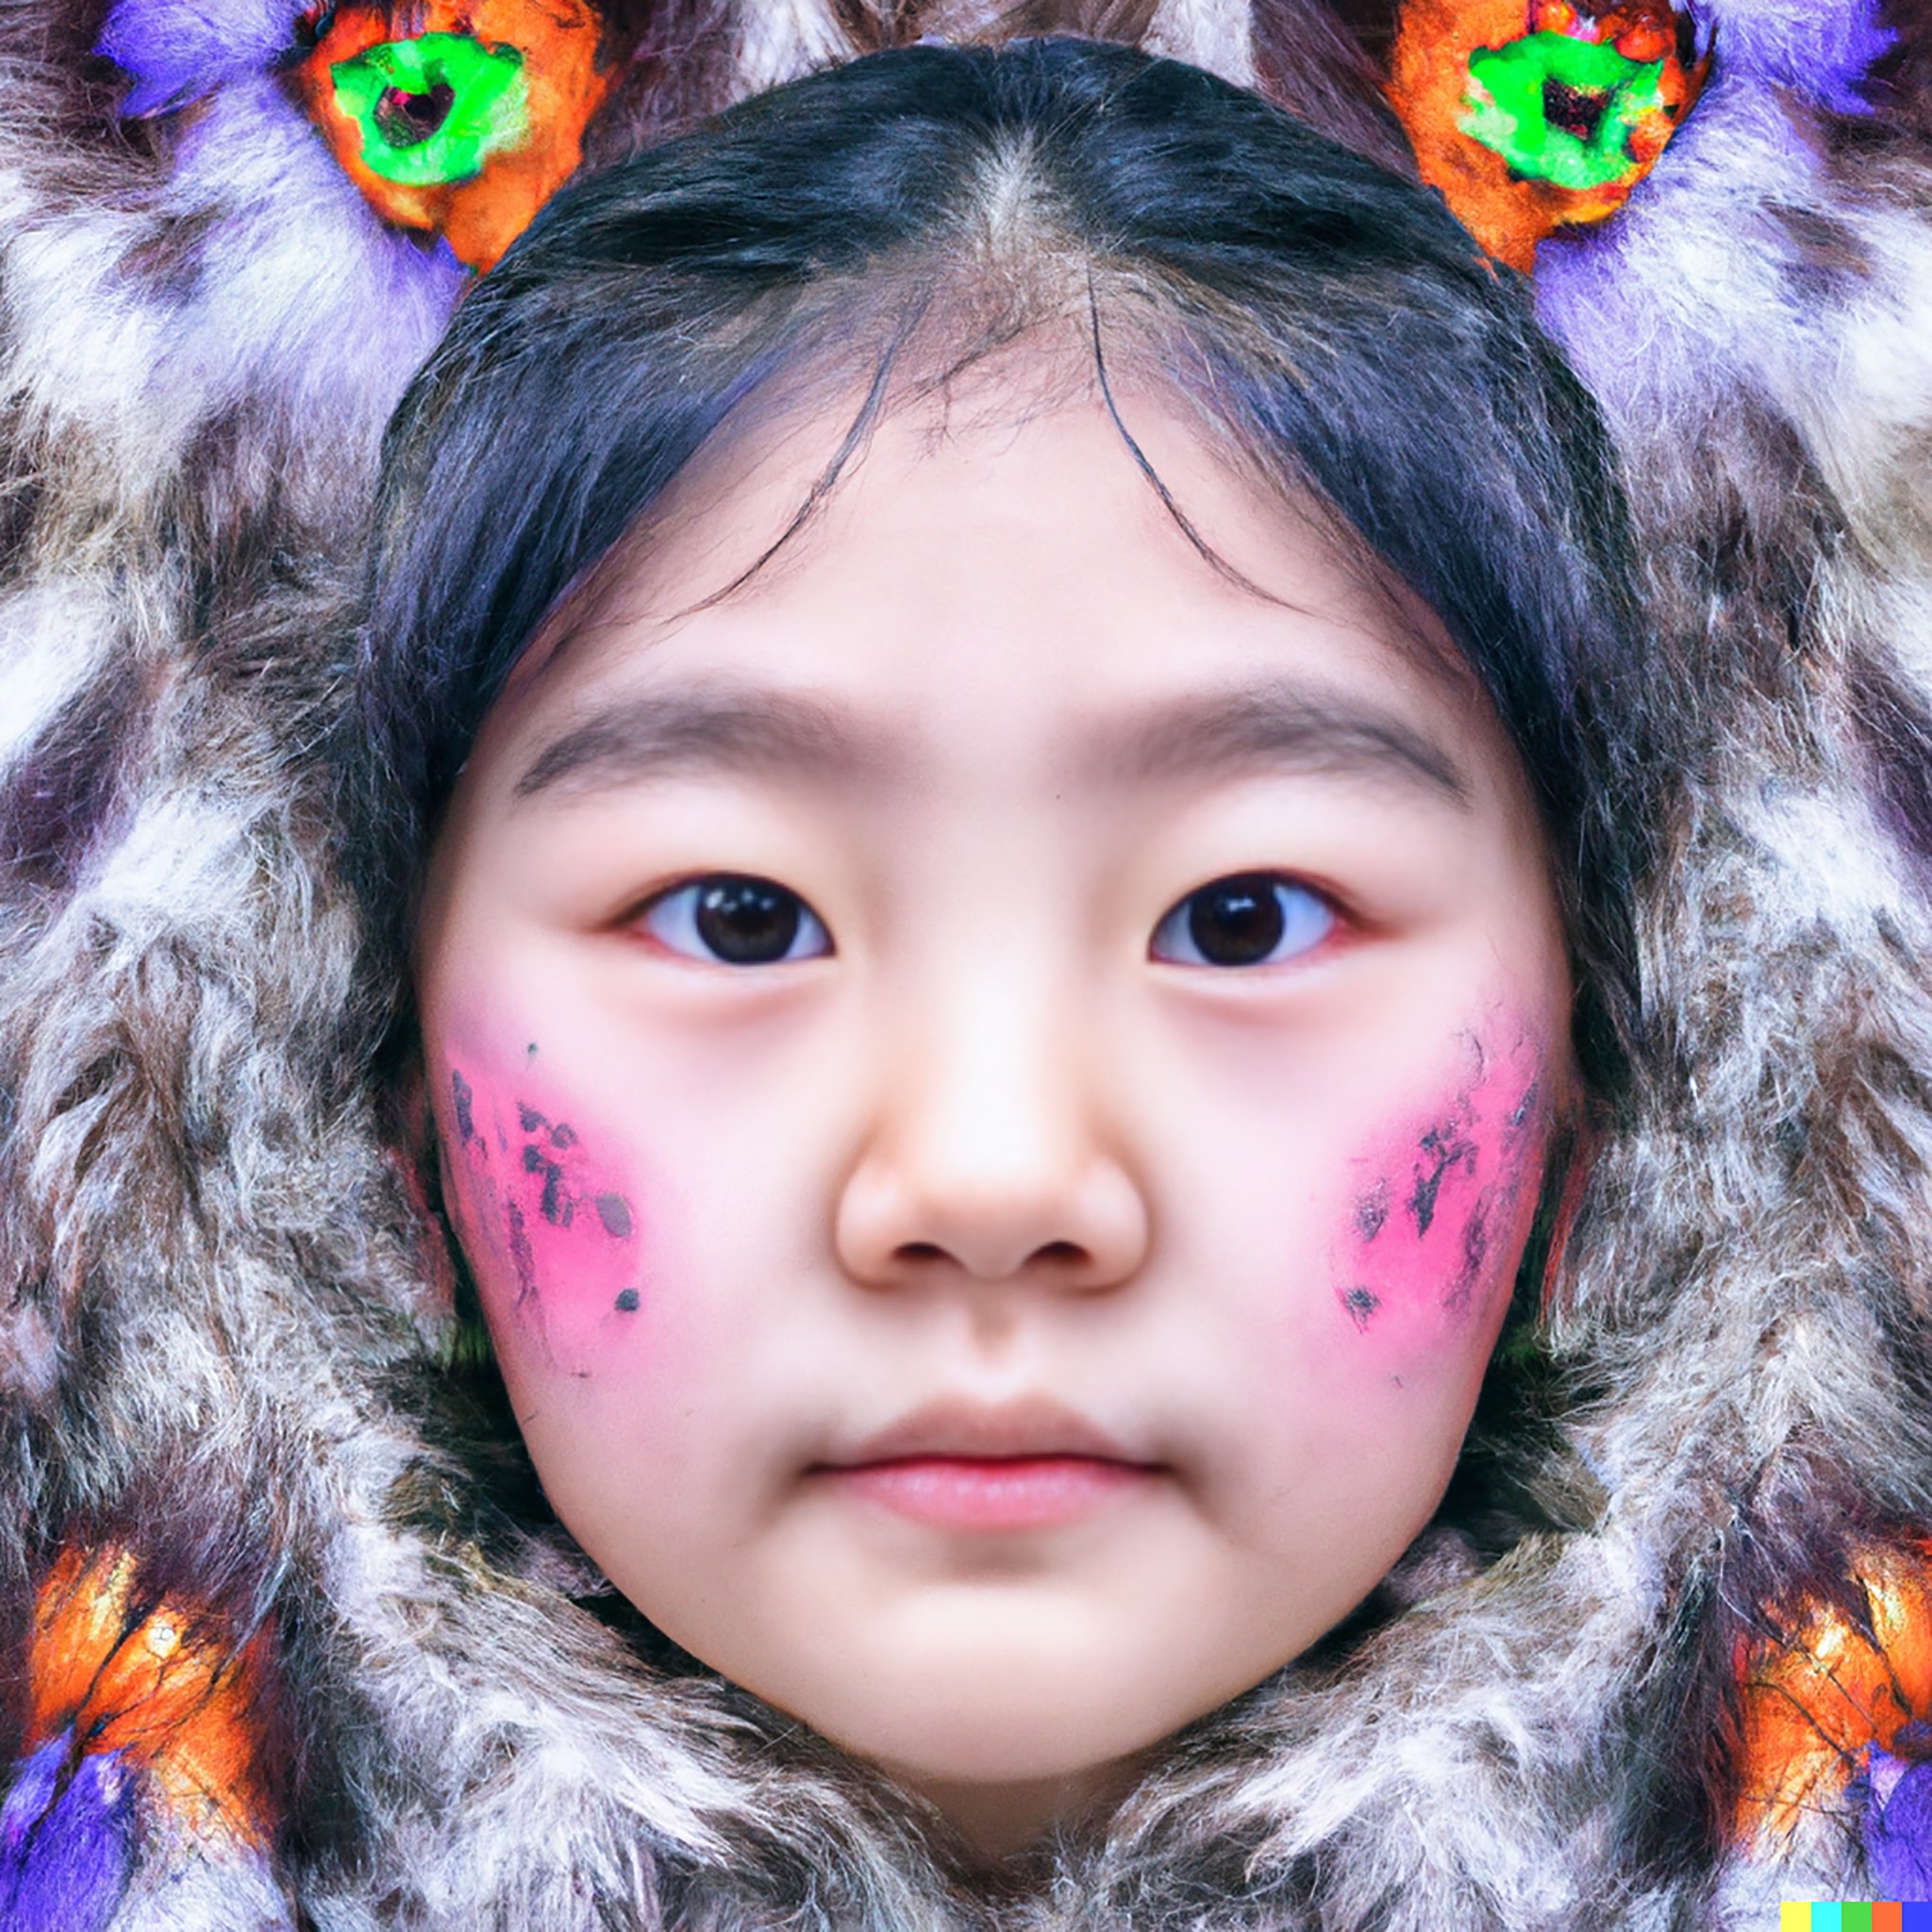 mongolian-girl-with-a-coat-made-of-the-colorful-feathers-1